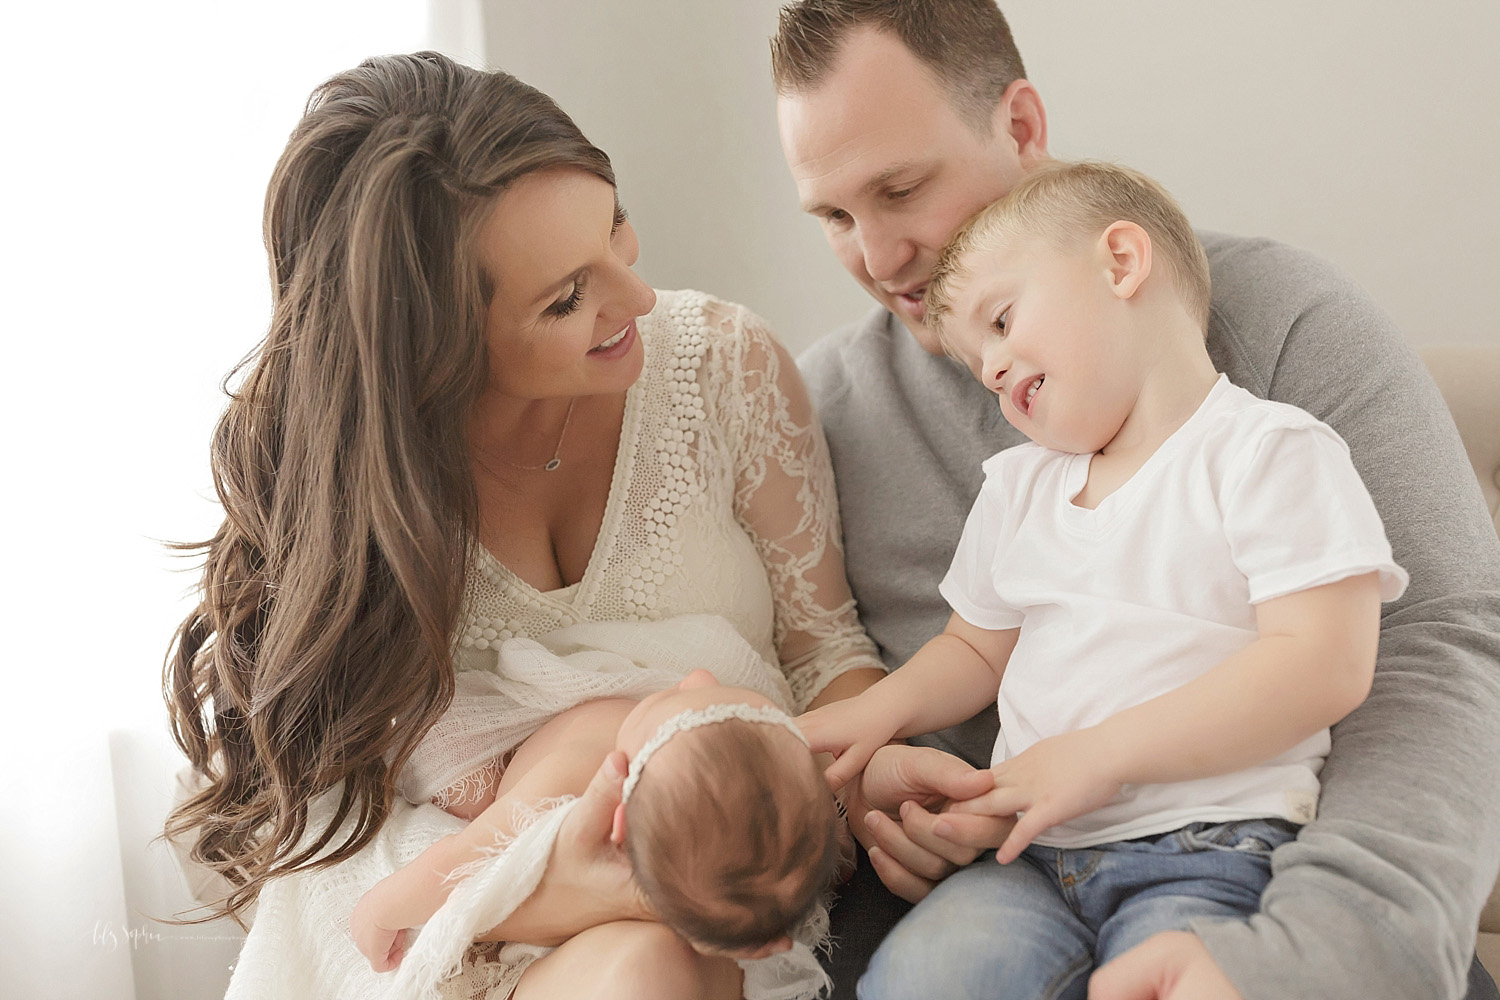  Image of a mother, sitting on a couch, holding her sleeping daughter on her lap while her husband holds their toddler son on his lap, and they all look down at the baby.&nbsp; 